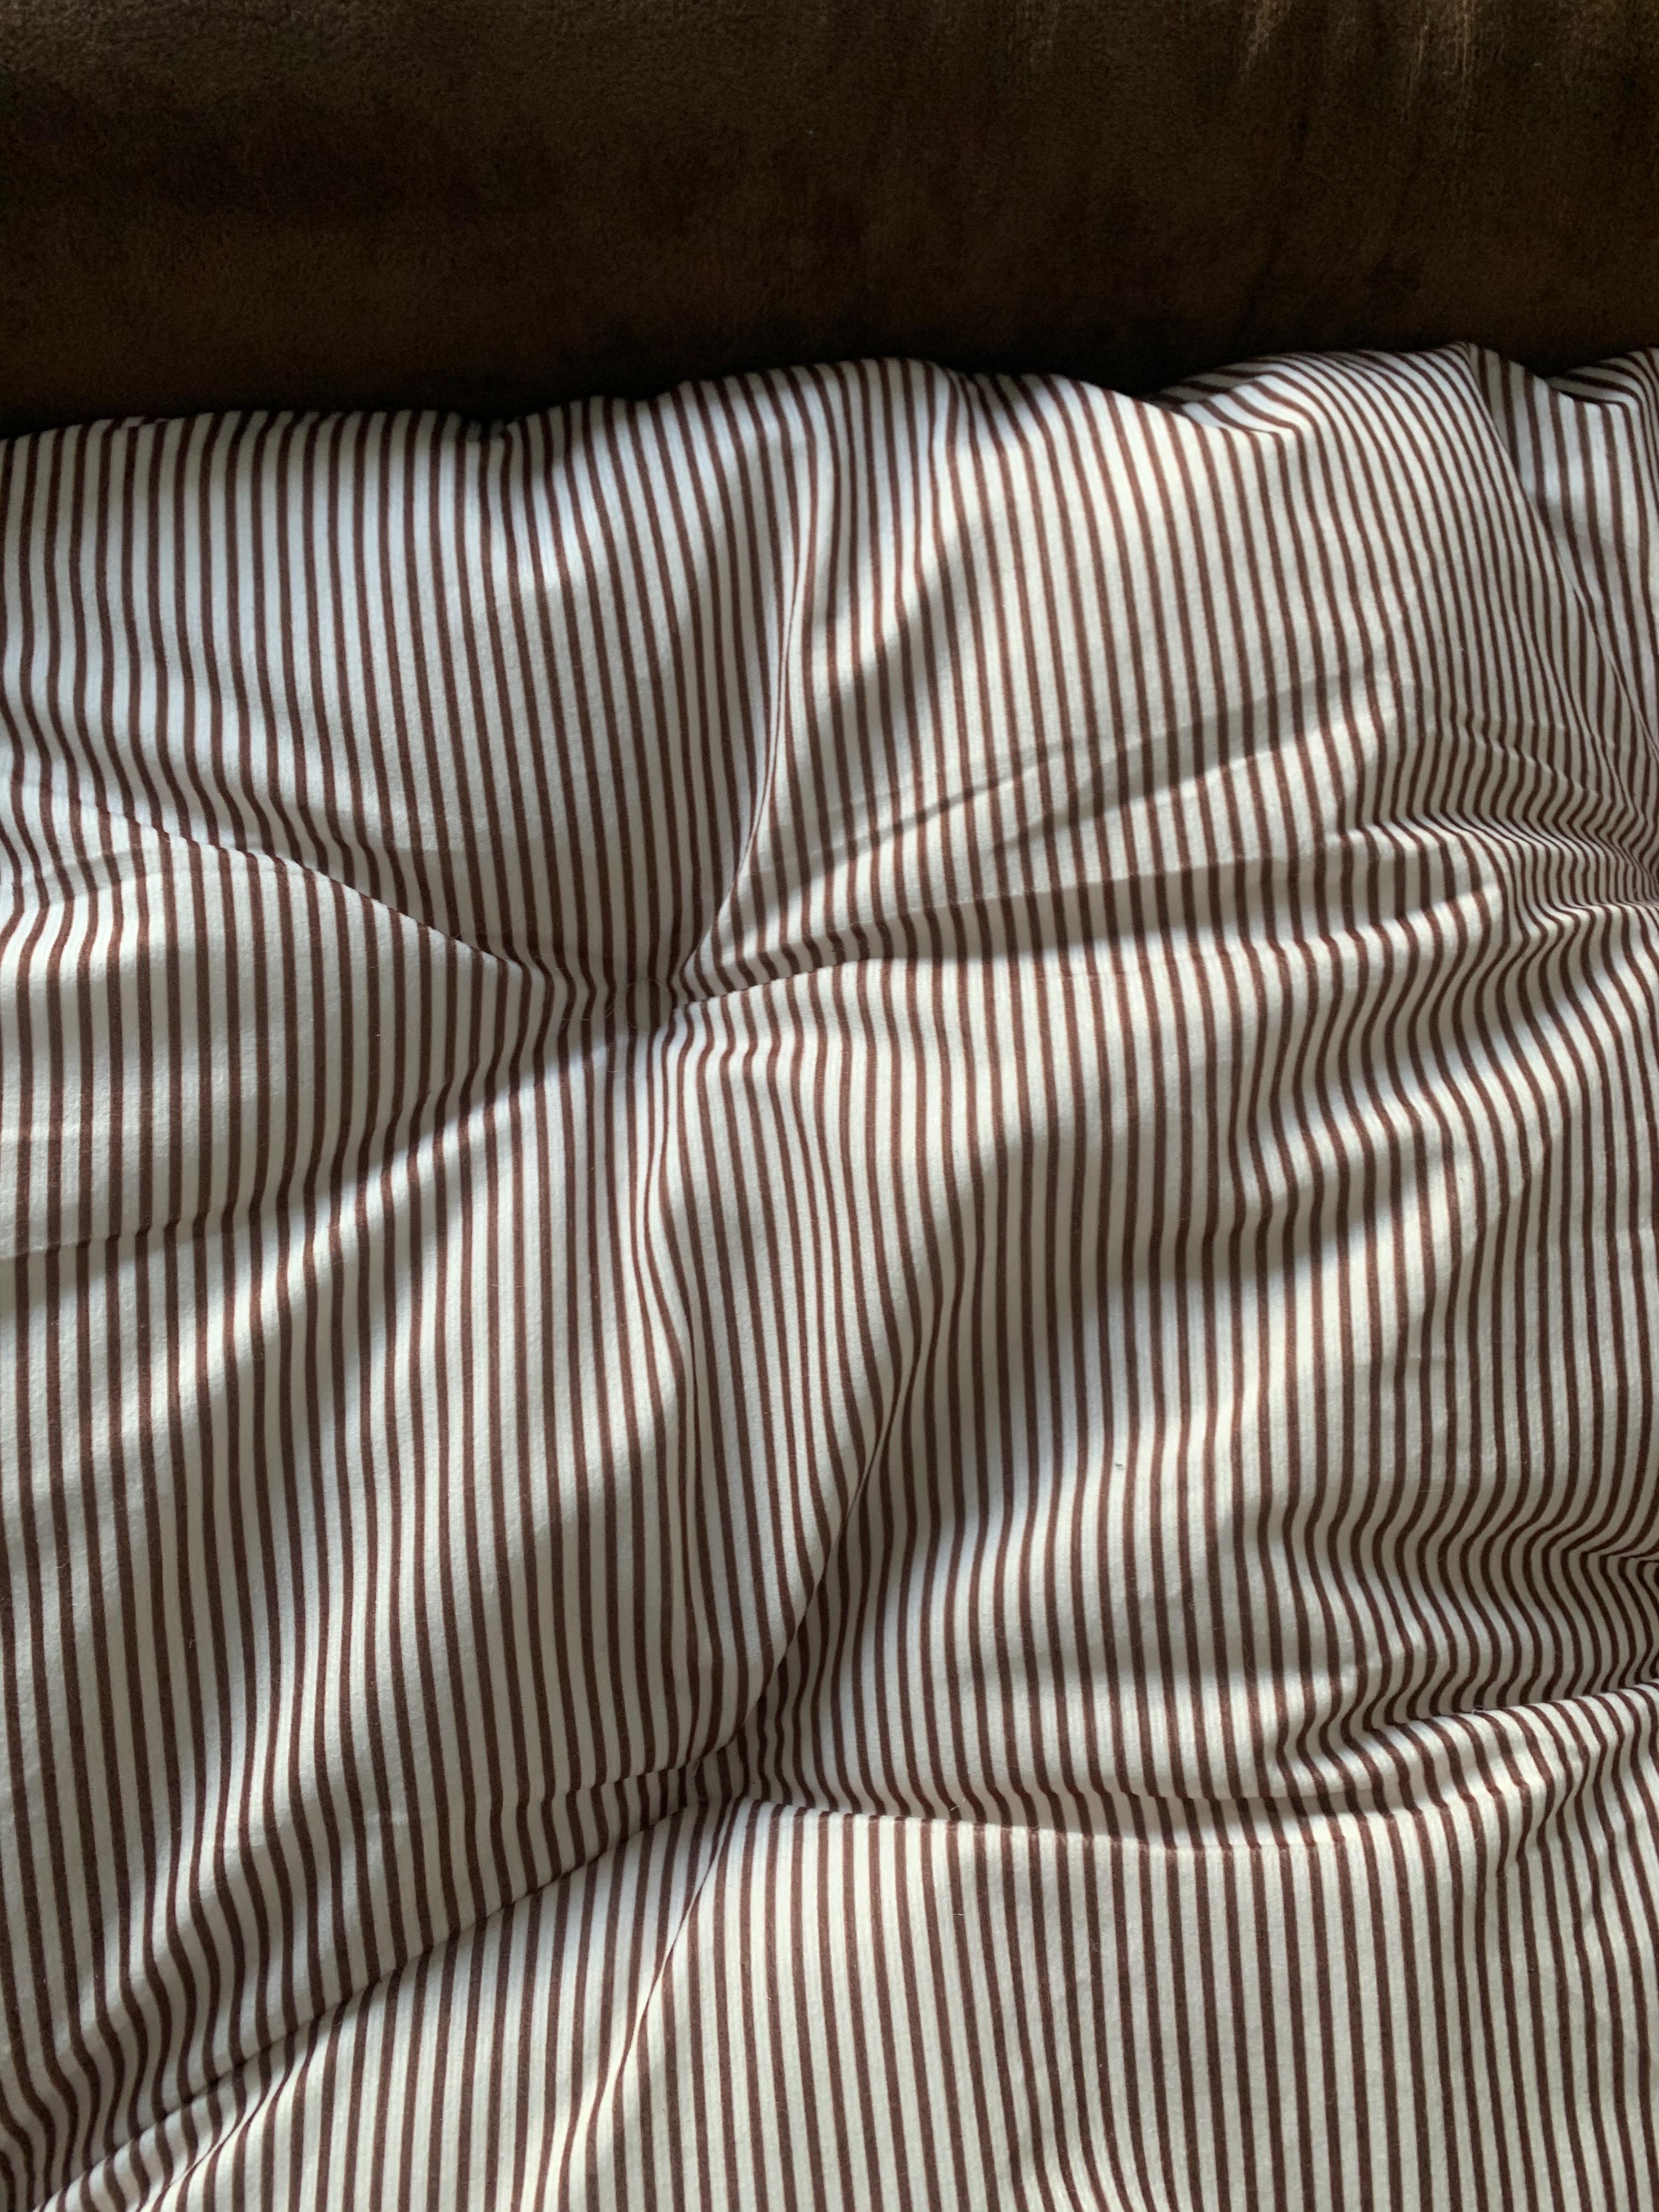 Close up of striped dog bed cushion